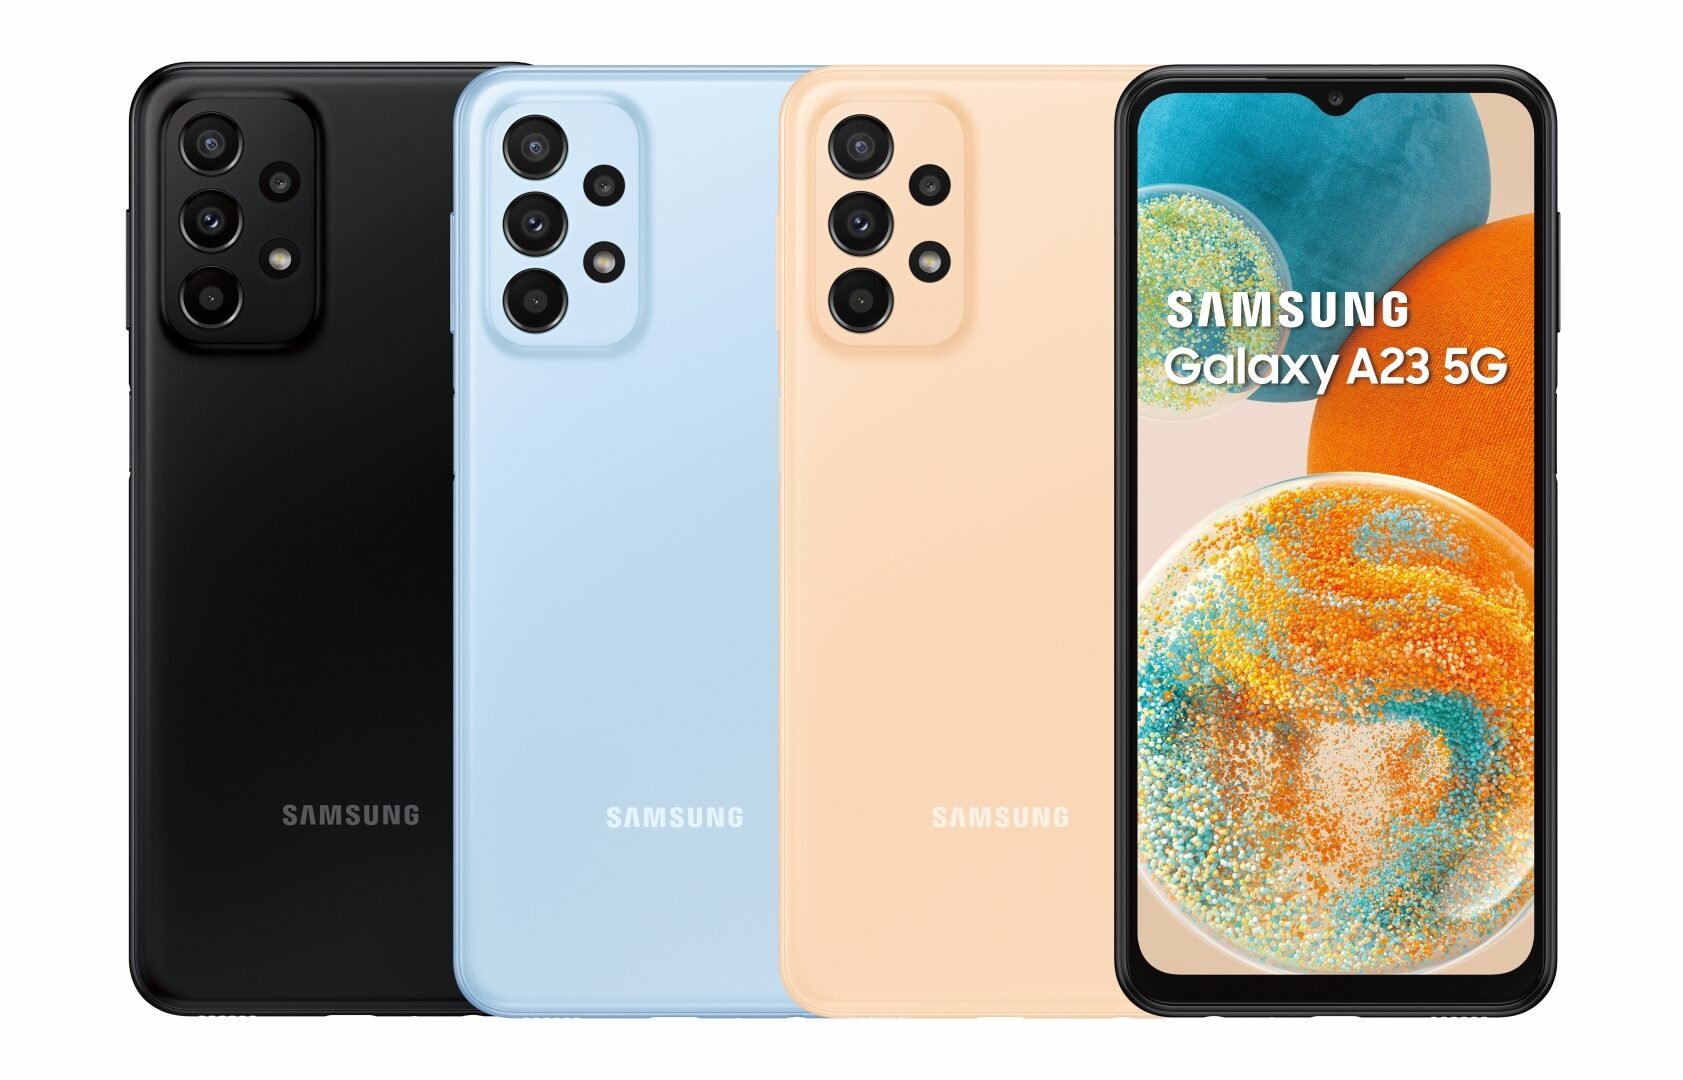 Samsung confirms Galaxy A23 5G release date, price, wall charger bundle -  SamMobile